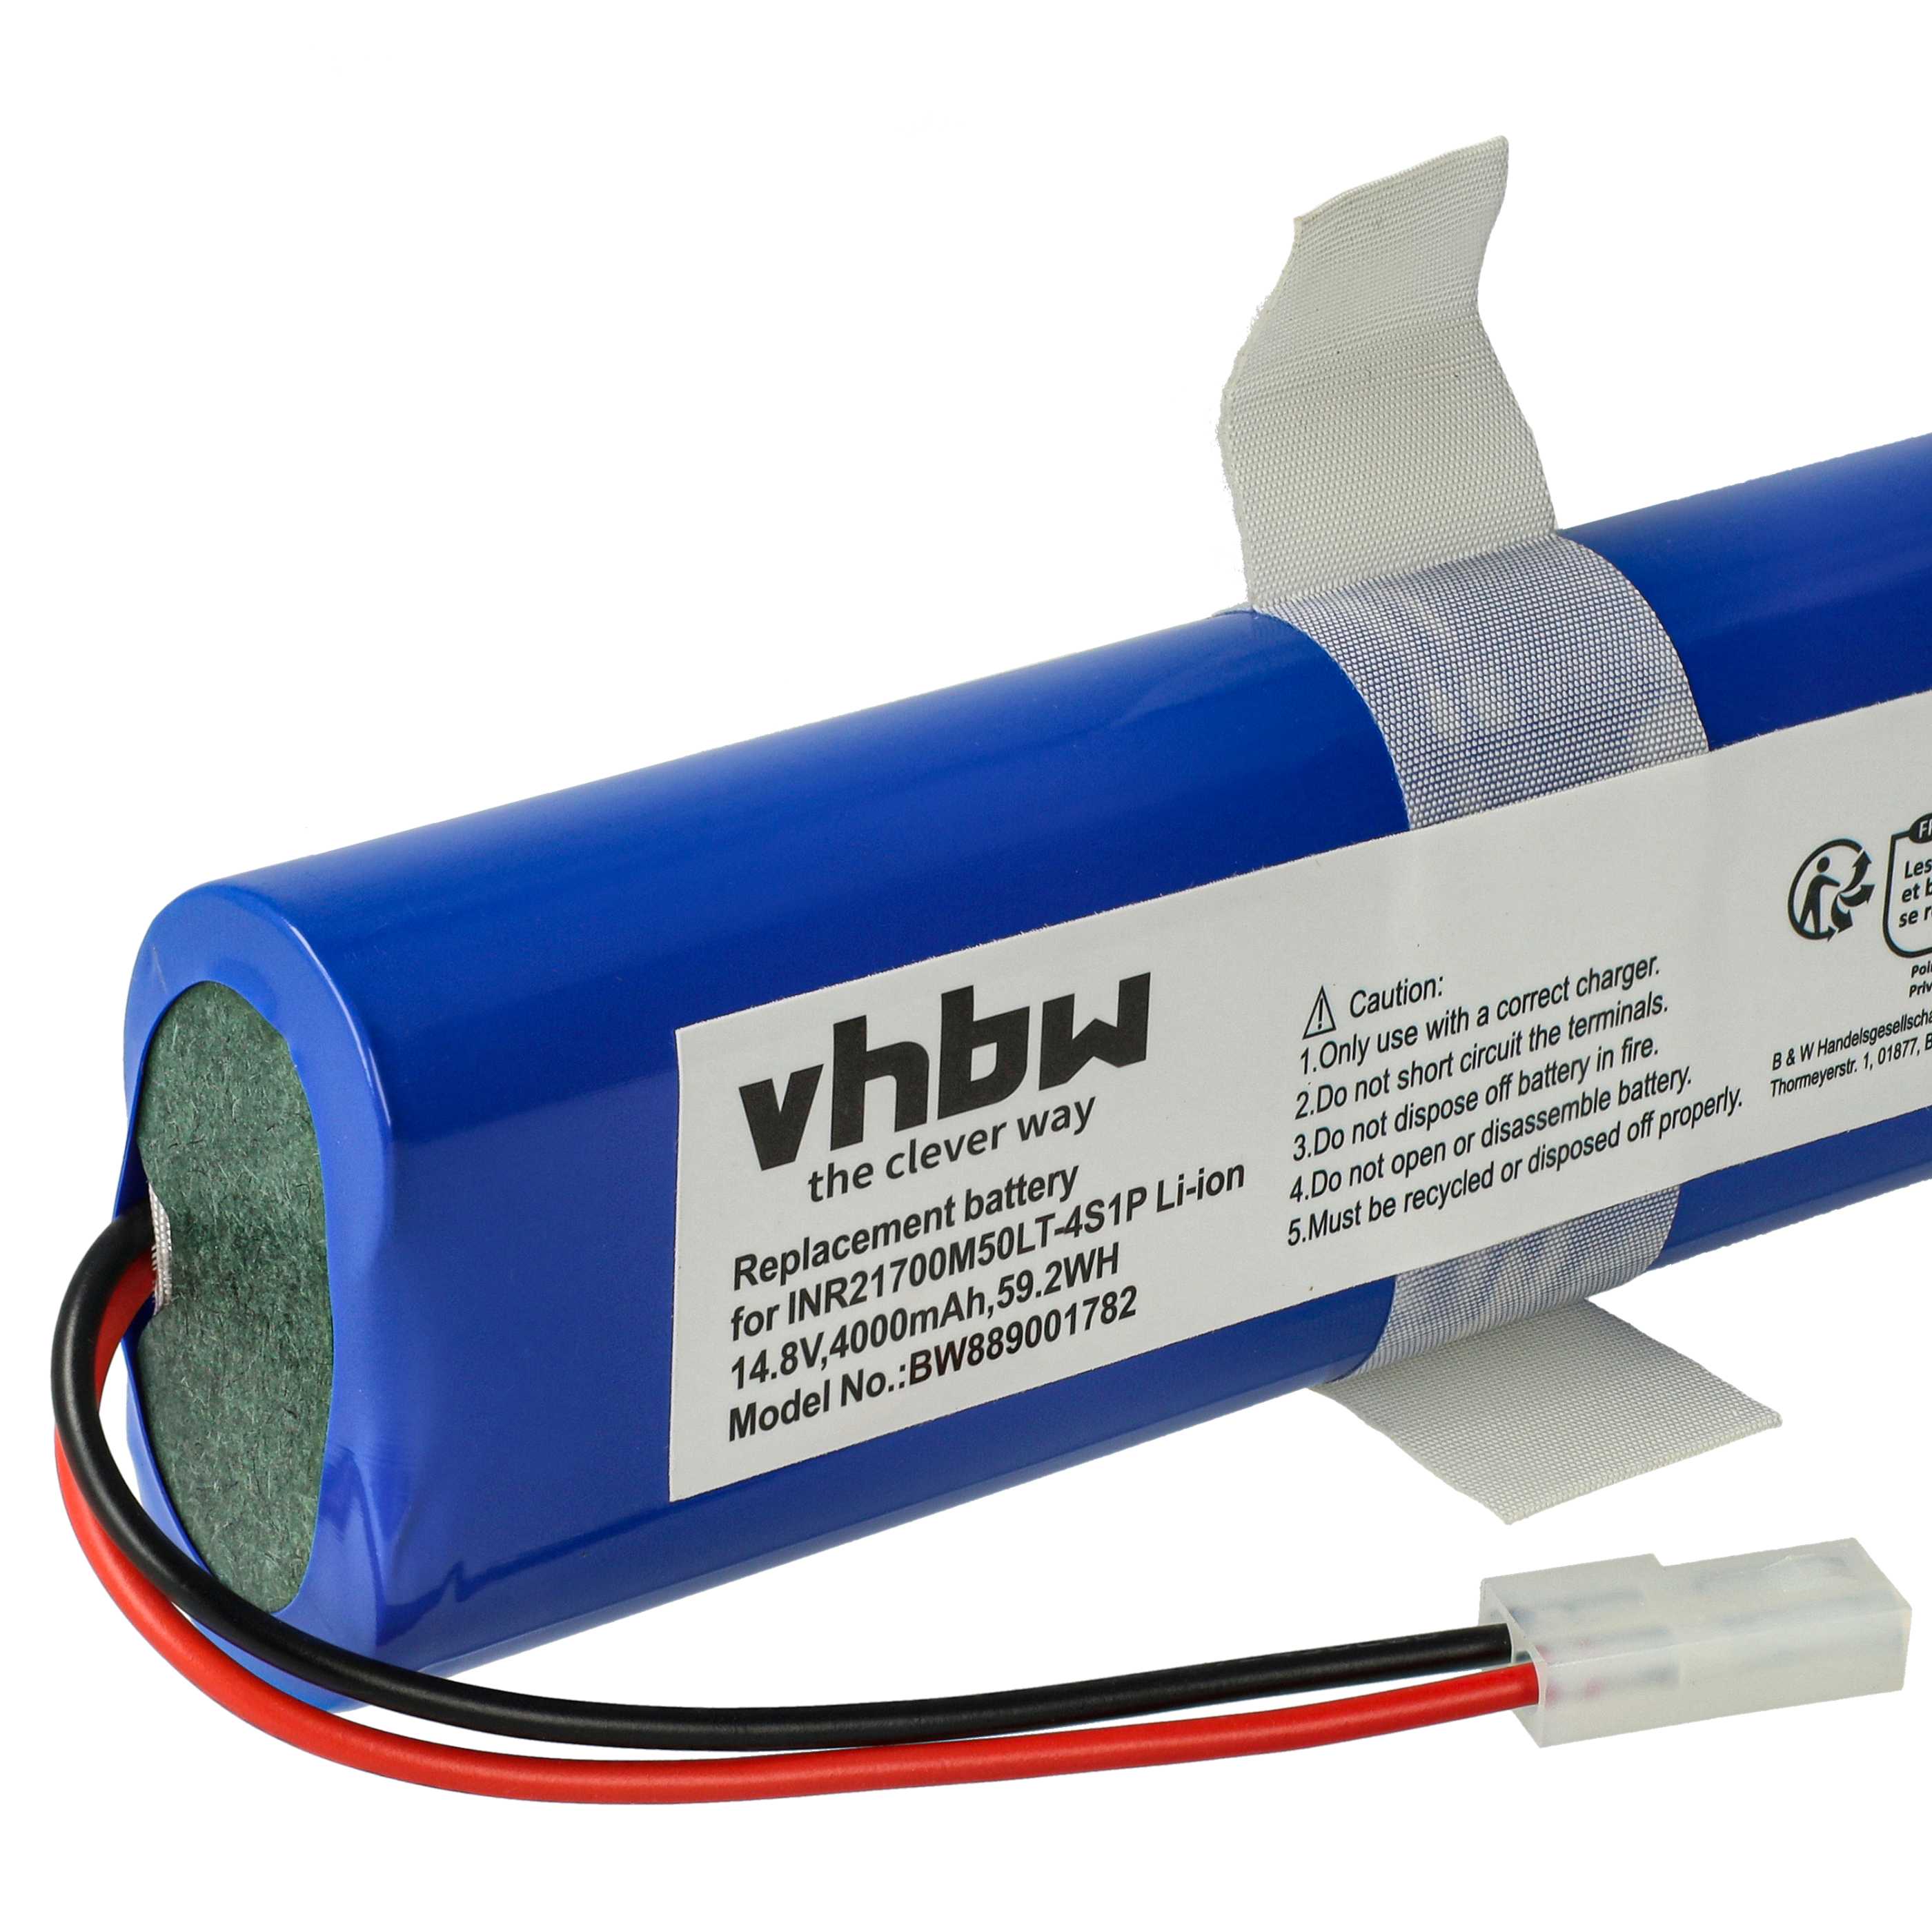 Battery Replacement for 360 INR21700M50LT-4S1P for - 4000mAh, 14.8V, Li-Ion